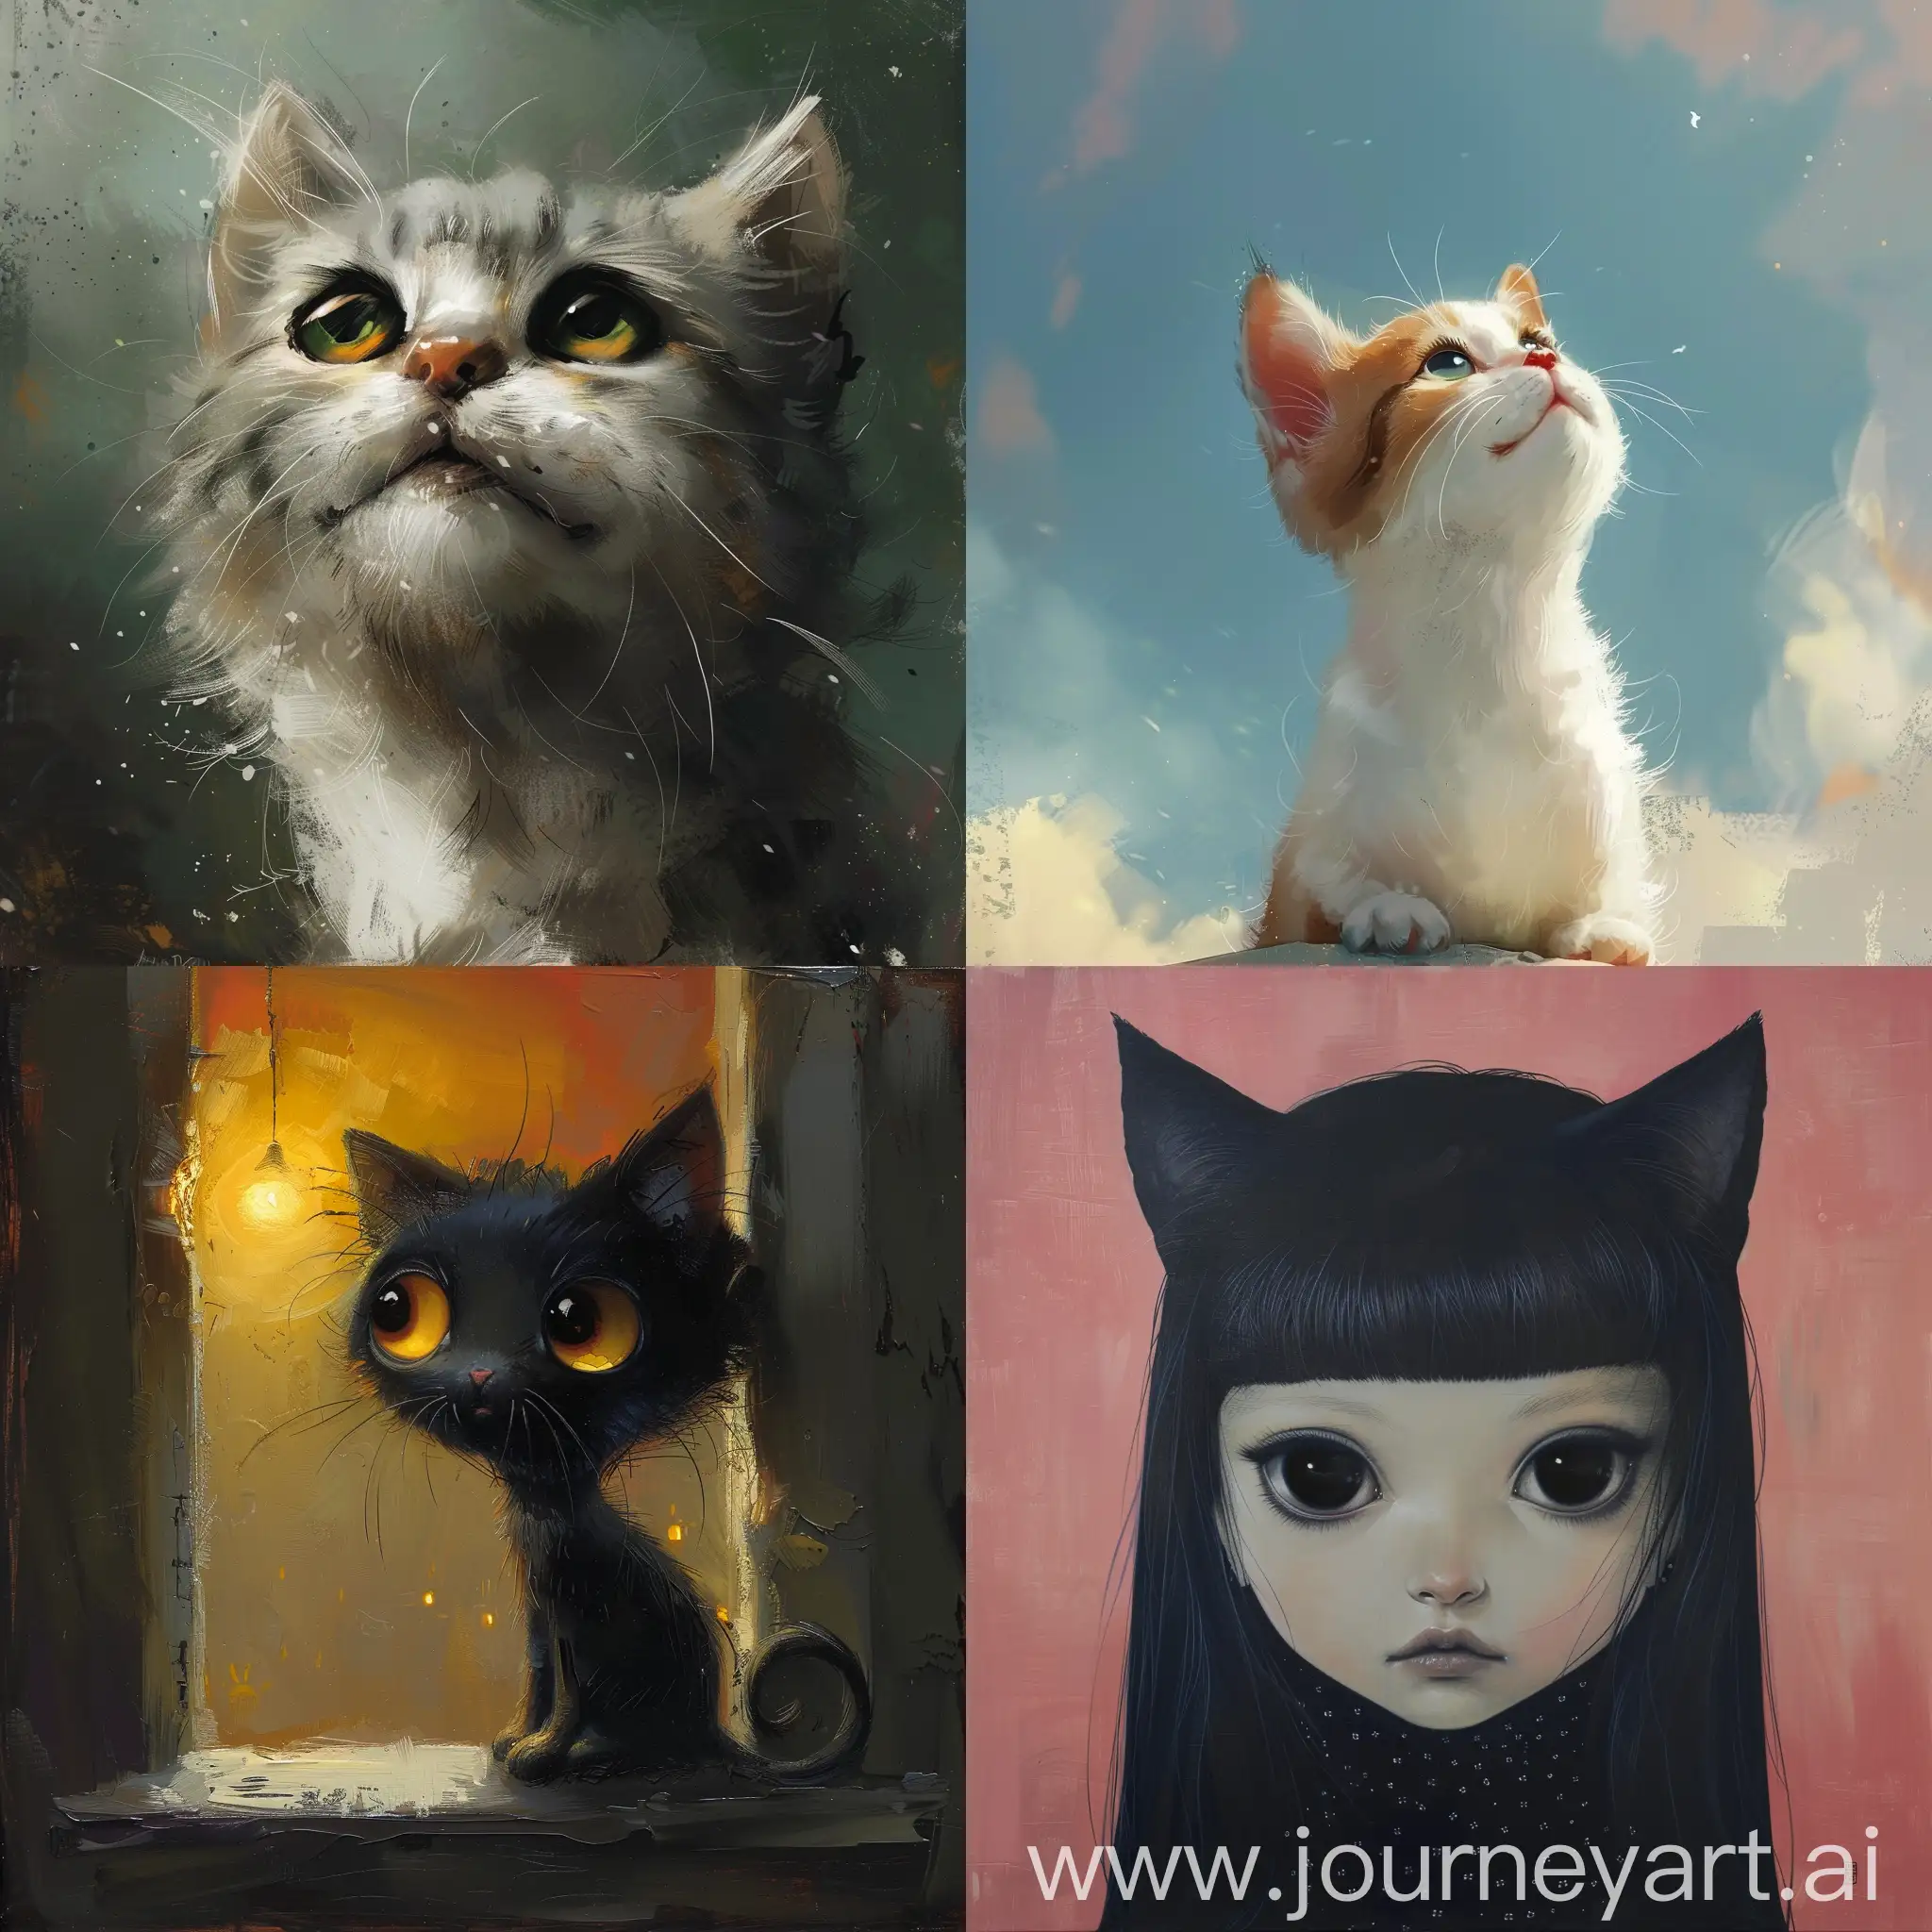 Whimsical-Cat-Character-Inspired-Art-A-Blend-of-Lois-van-Baarle-WilliamAdolphe-Bouguereau-and-Ghibli-Studio